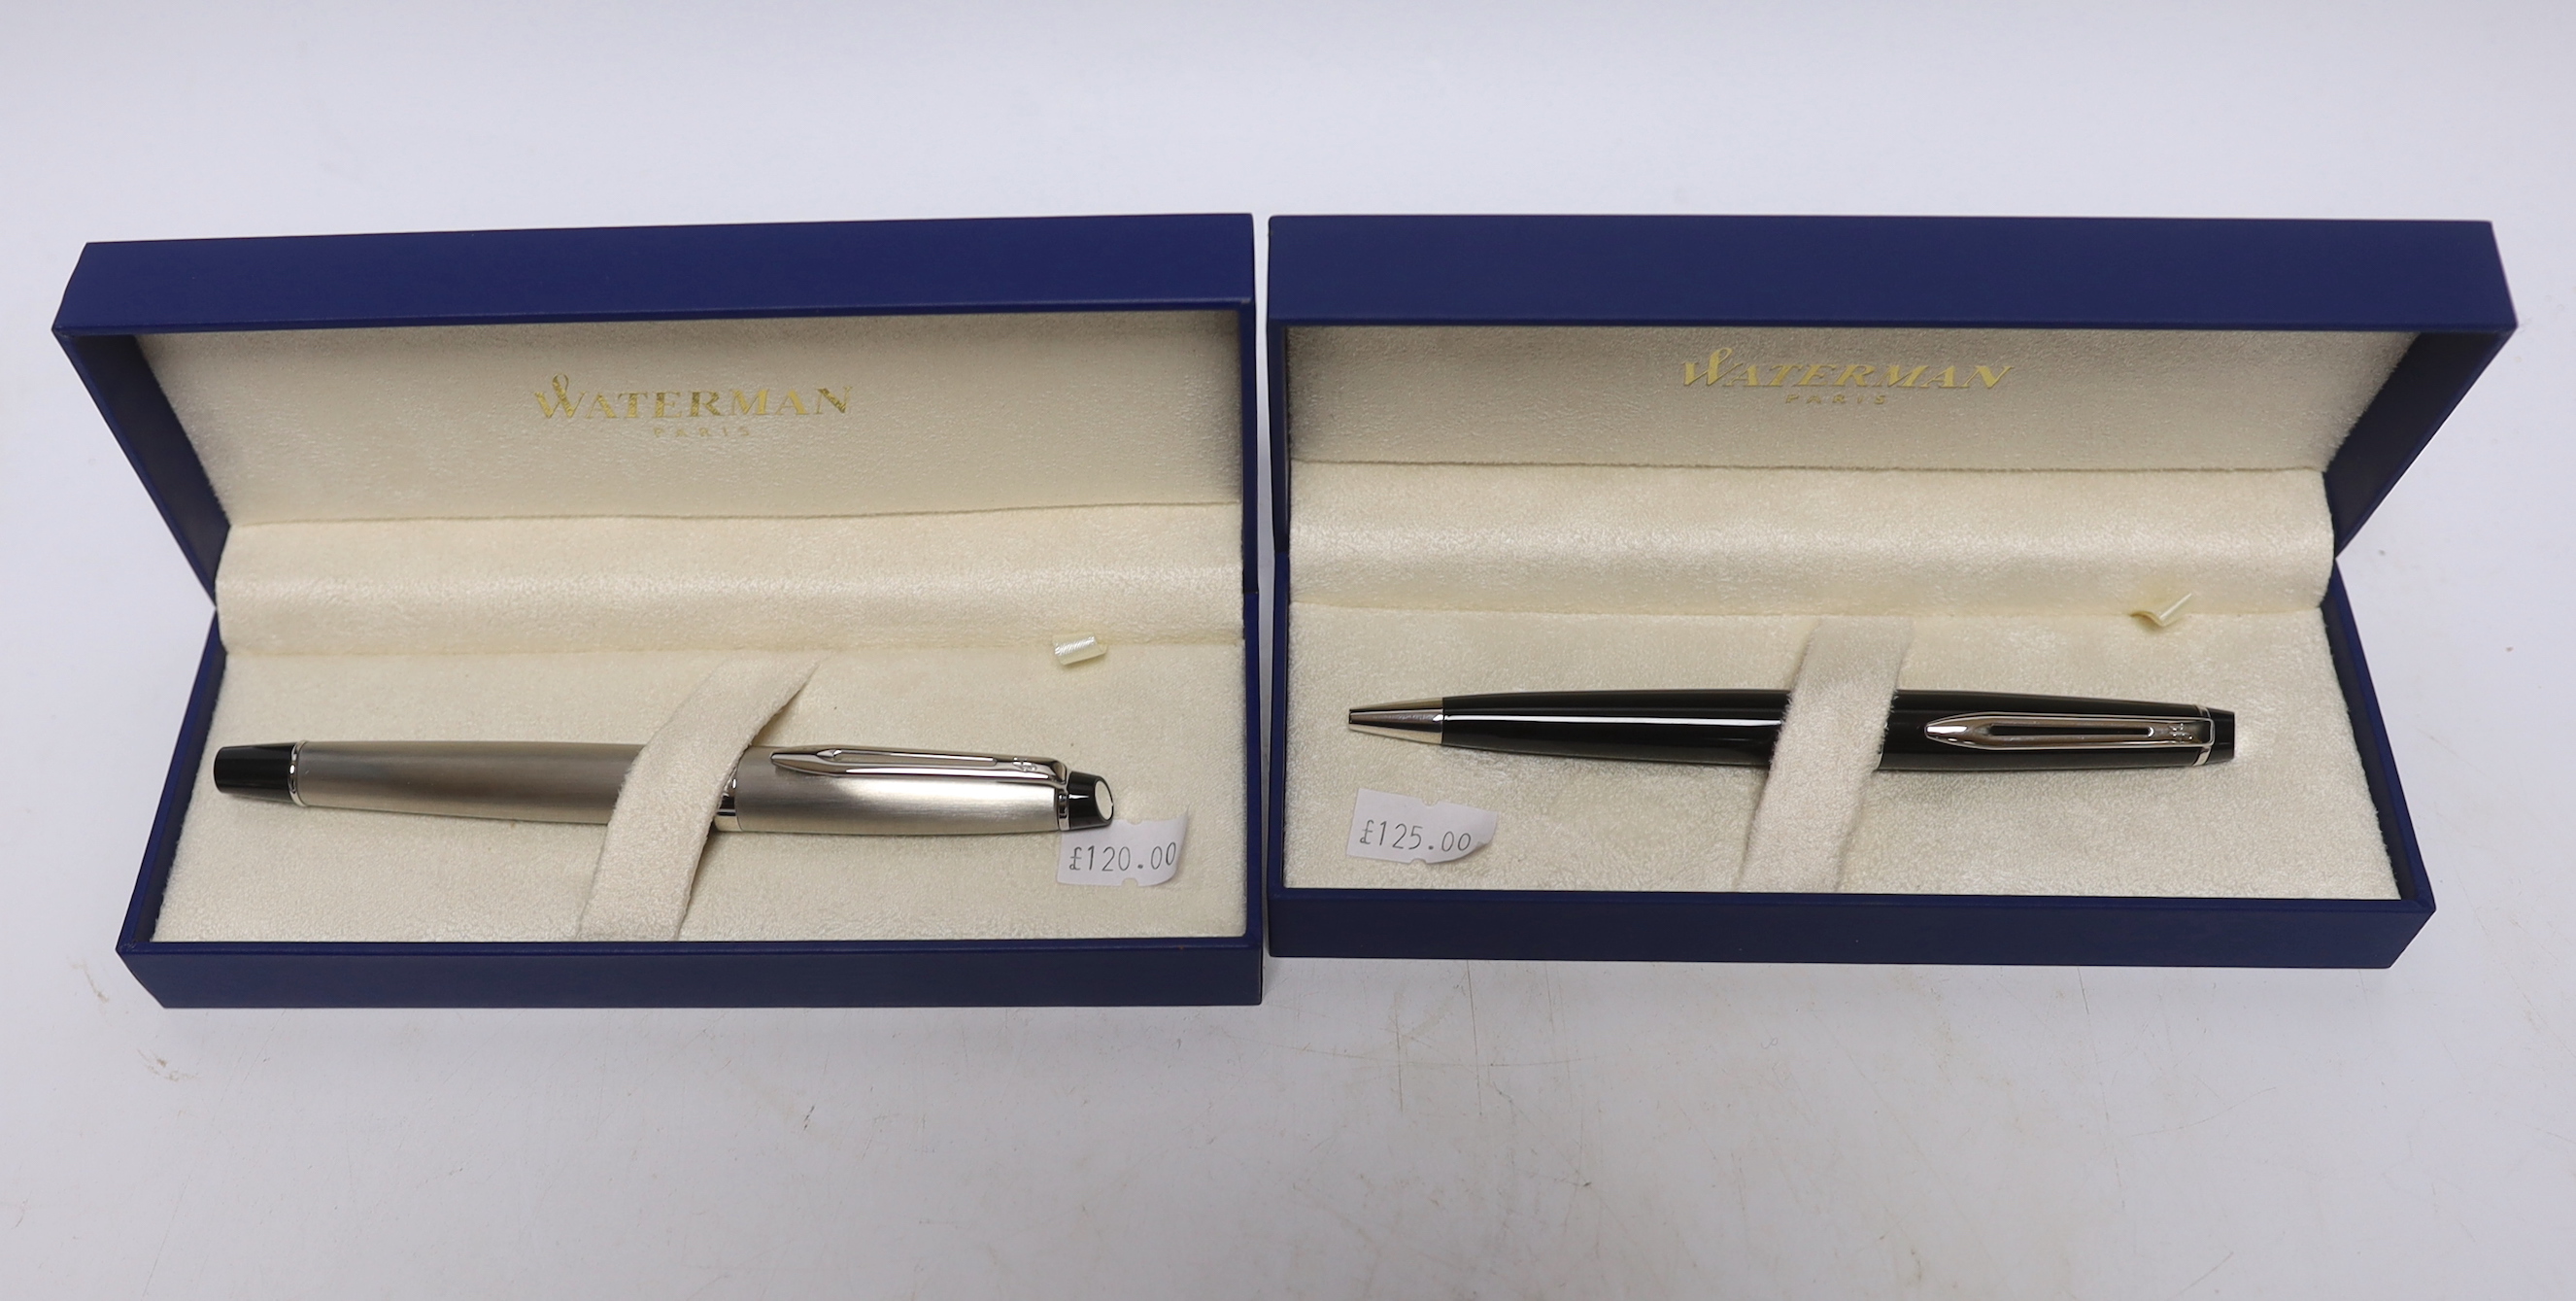 Six boxed Waterman pens; three Expert Rollerball pens, two Expert Ballpoint pens, and a Hemisphere Rollerball pen